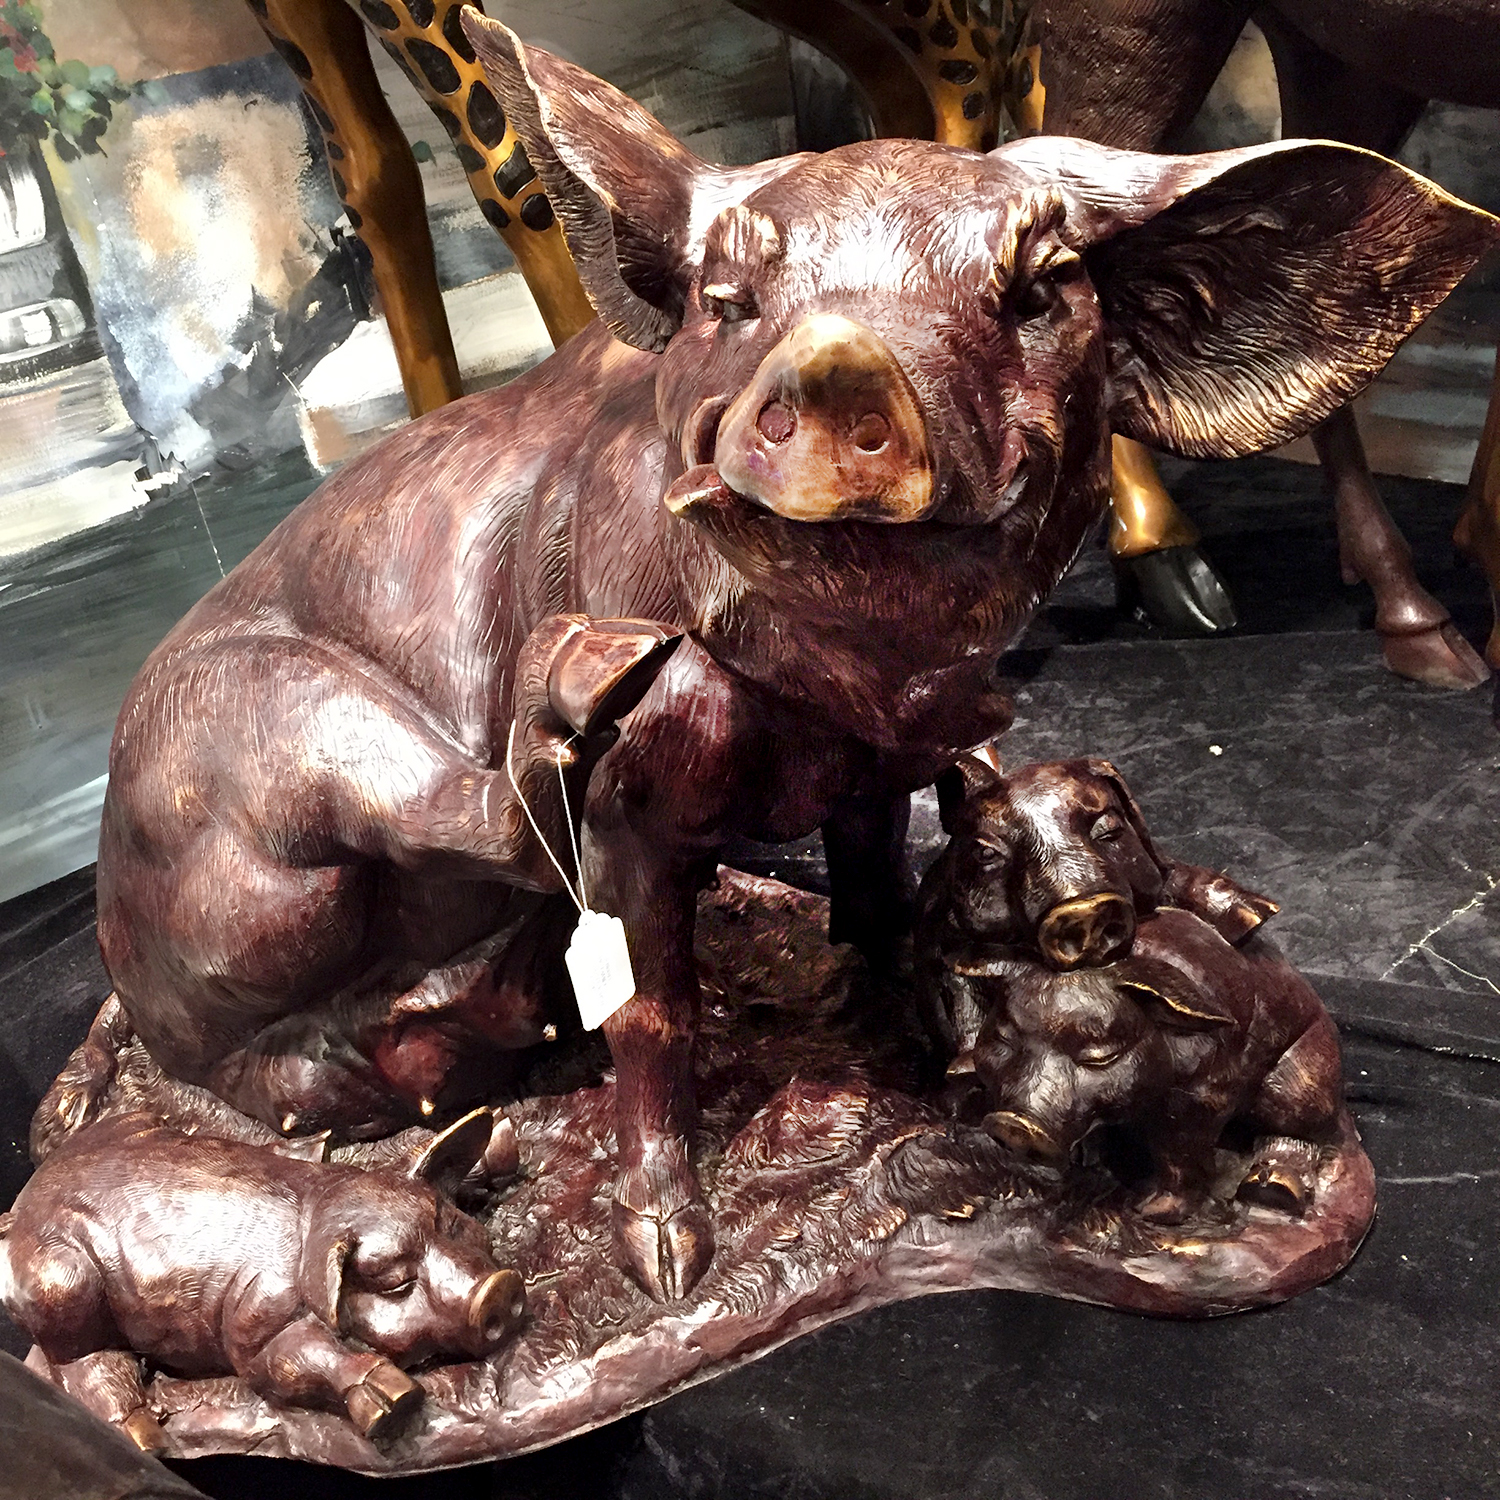 Cast Bronze Mother Pig & Piglets Sculpture by Metropolitan Galleries in French Brown patina. We offer a vast selection of cast bronze animal sculpture and f